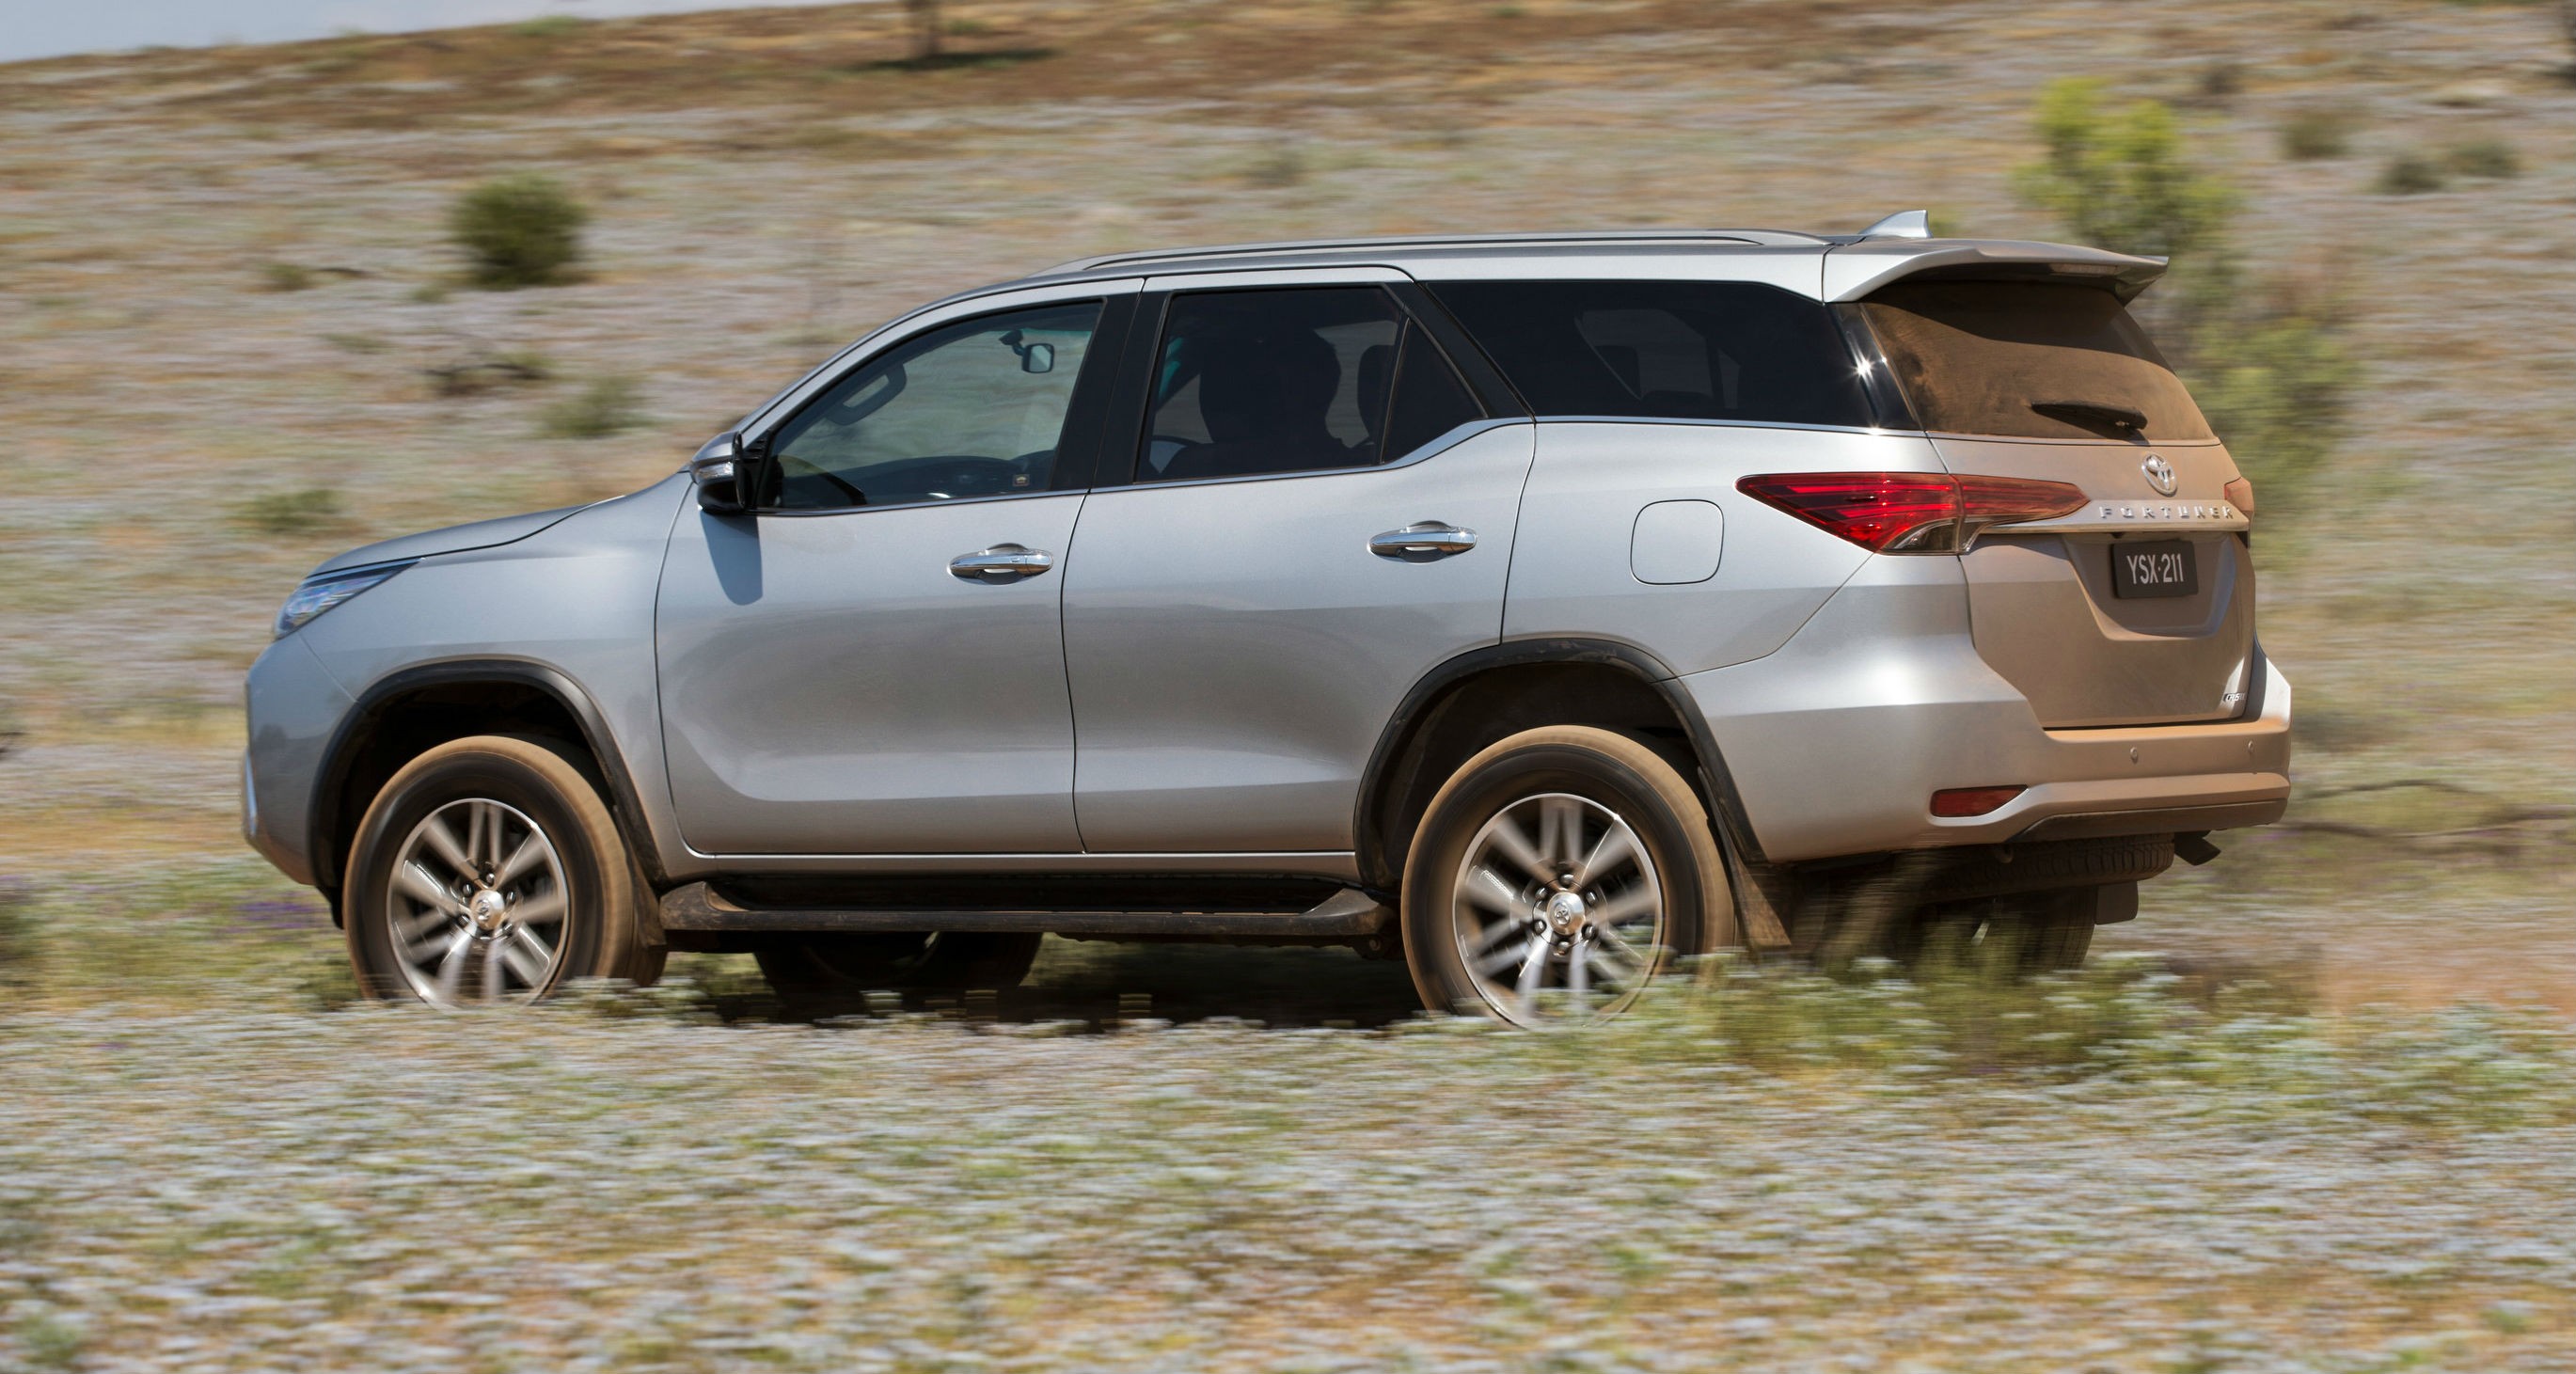 Images of Toyota Fortuner | 2739x1461